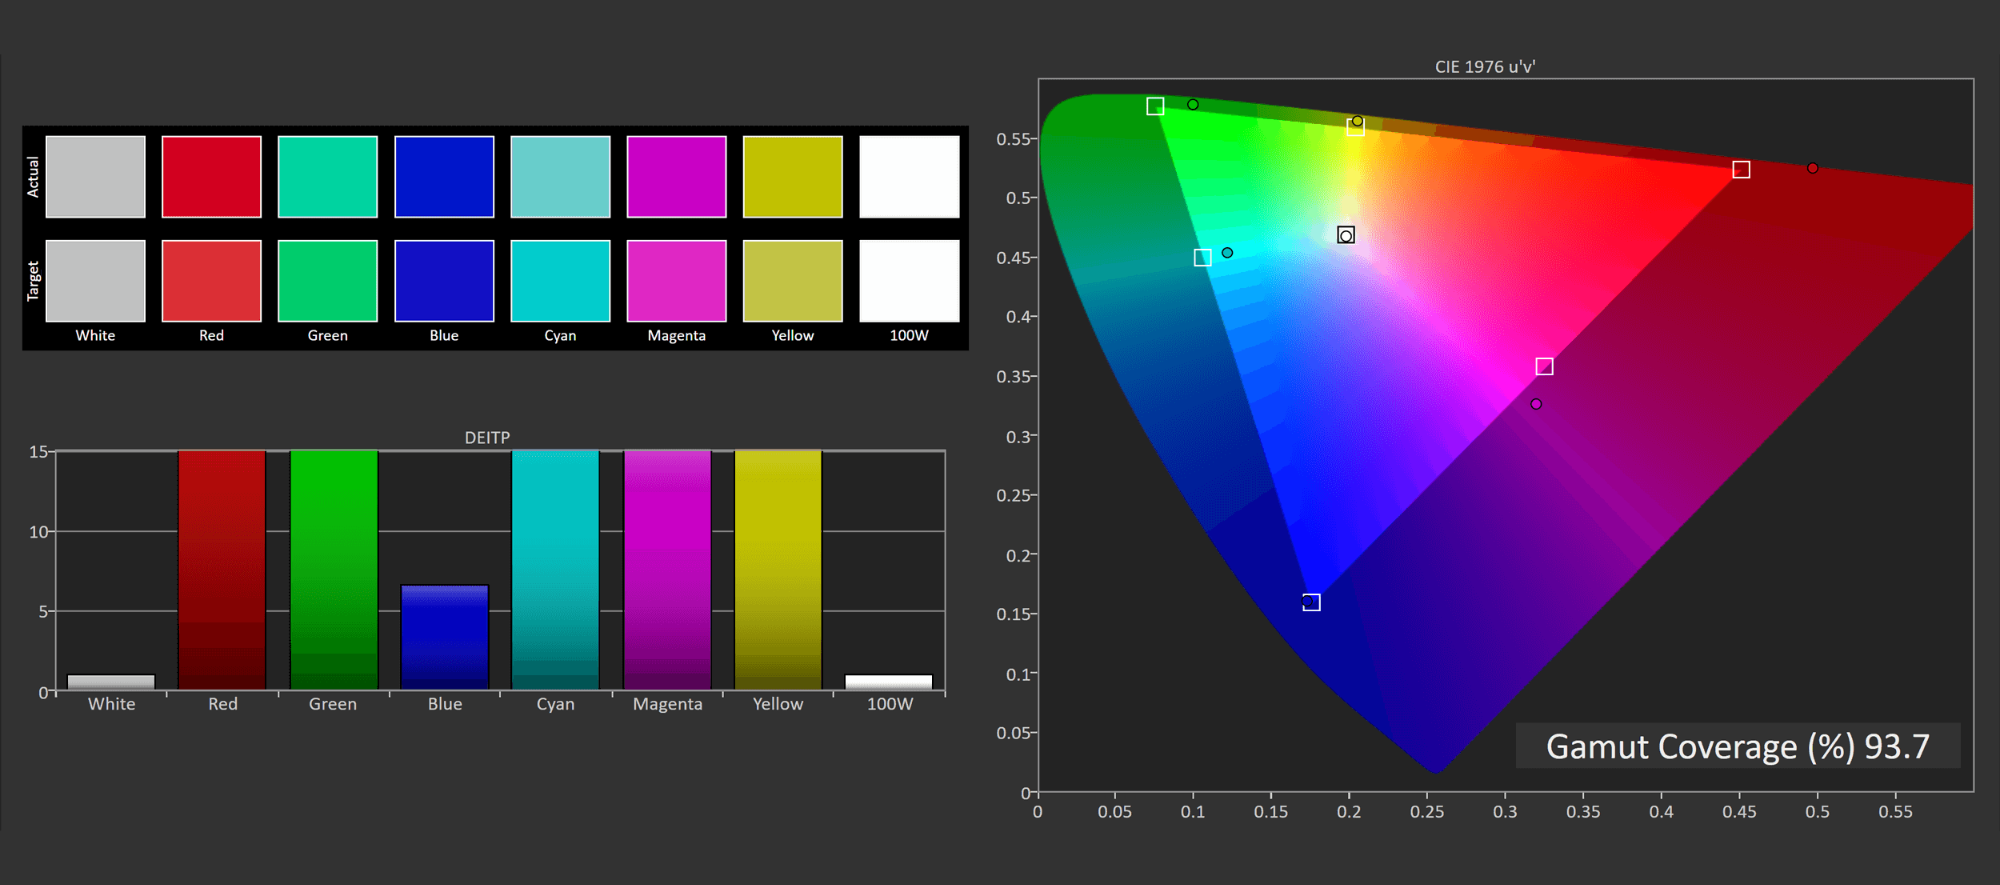 Evaluating Image Quality and Color Accuracy